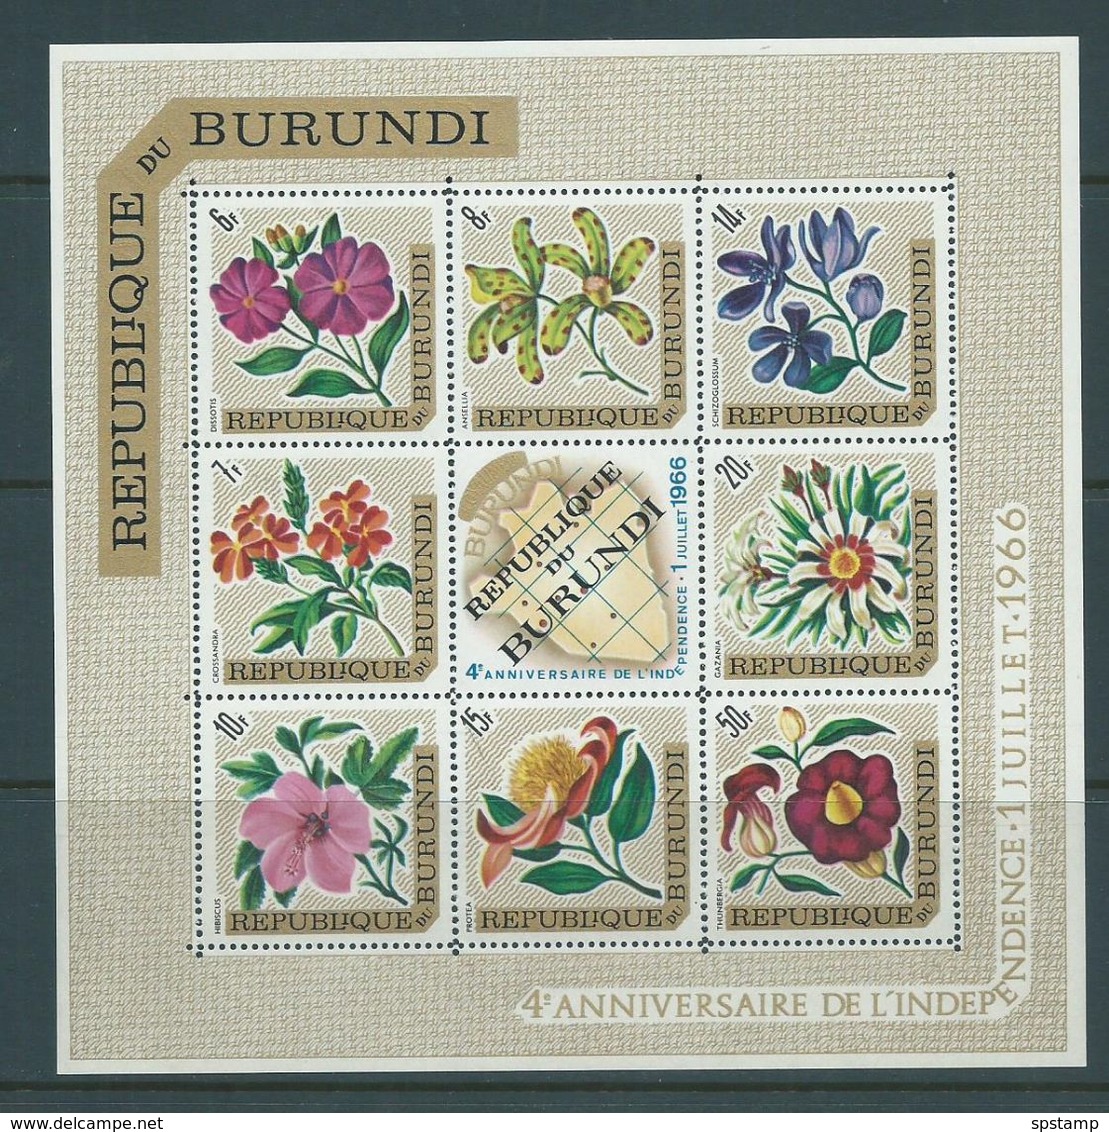 Burundi 1966 Republic Overprints On Flower Airs Sheet Of 8 , Map Centre Type MNH - Unused Stamps